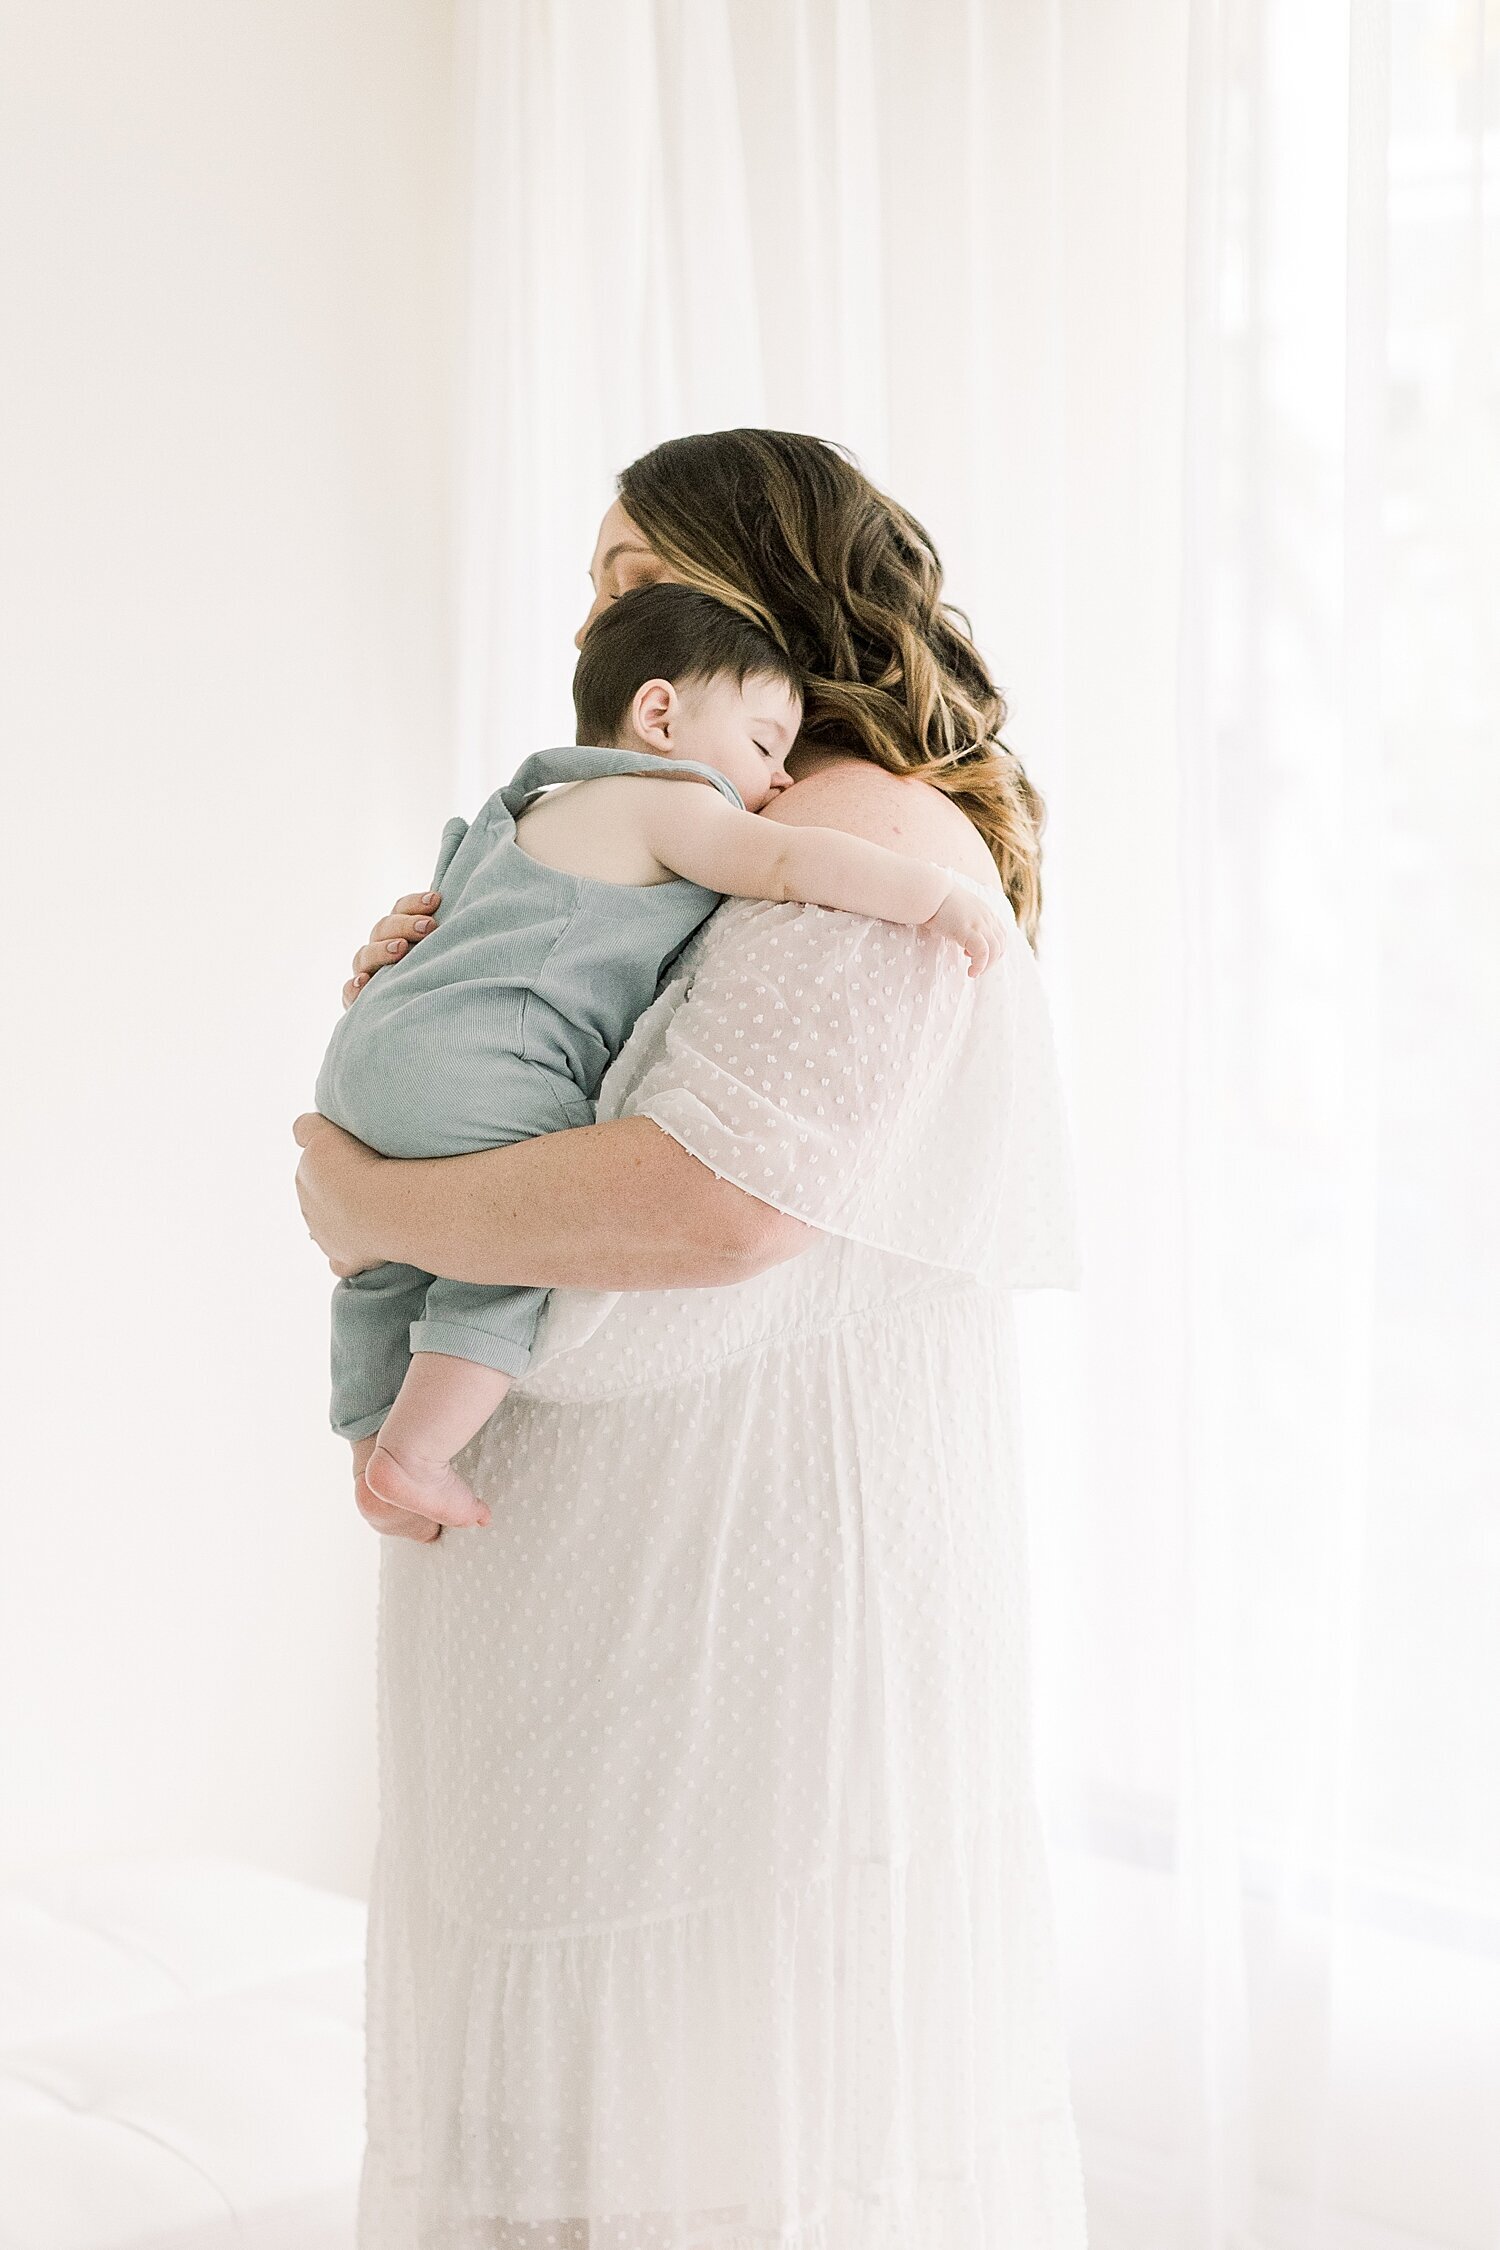 Mom snuggling her baby boy during six month milestone photoshoot with Ambre Williams Photography.